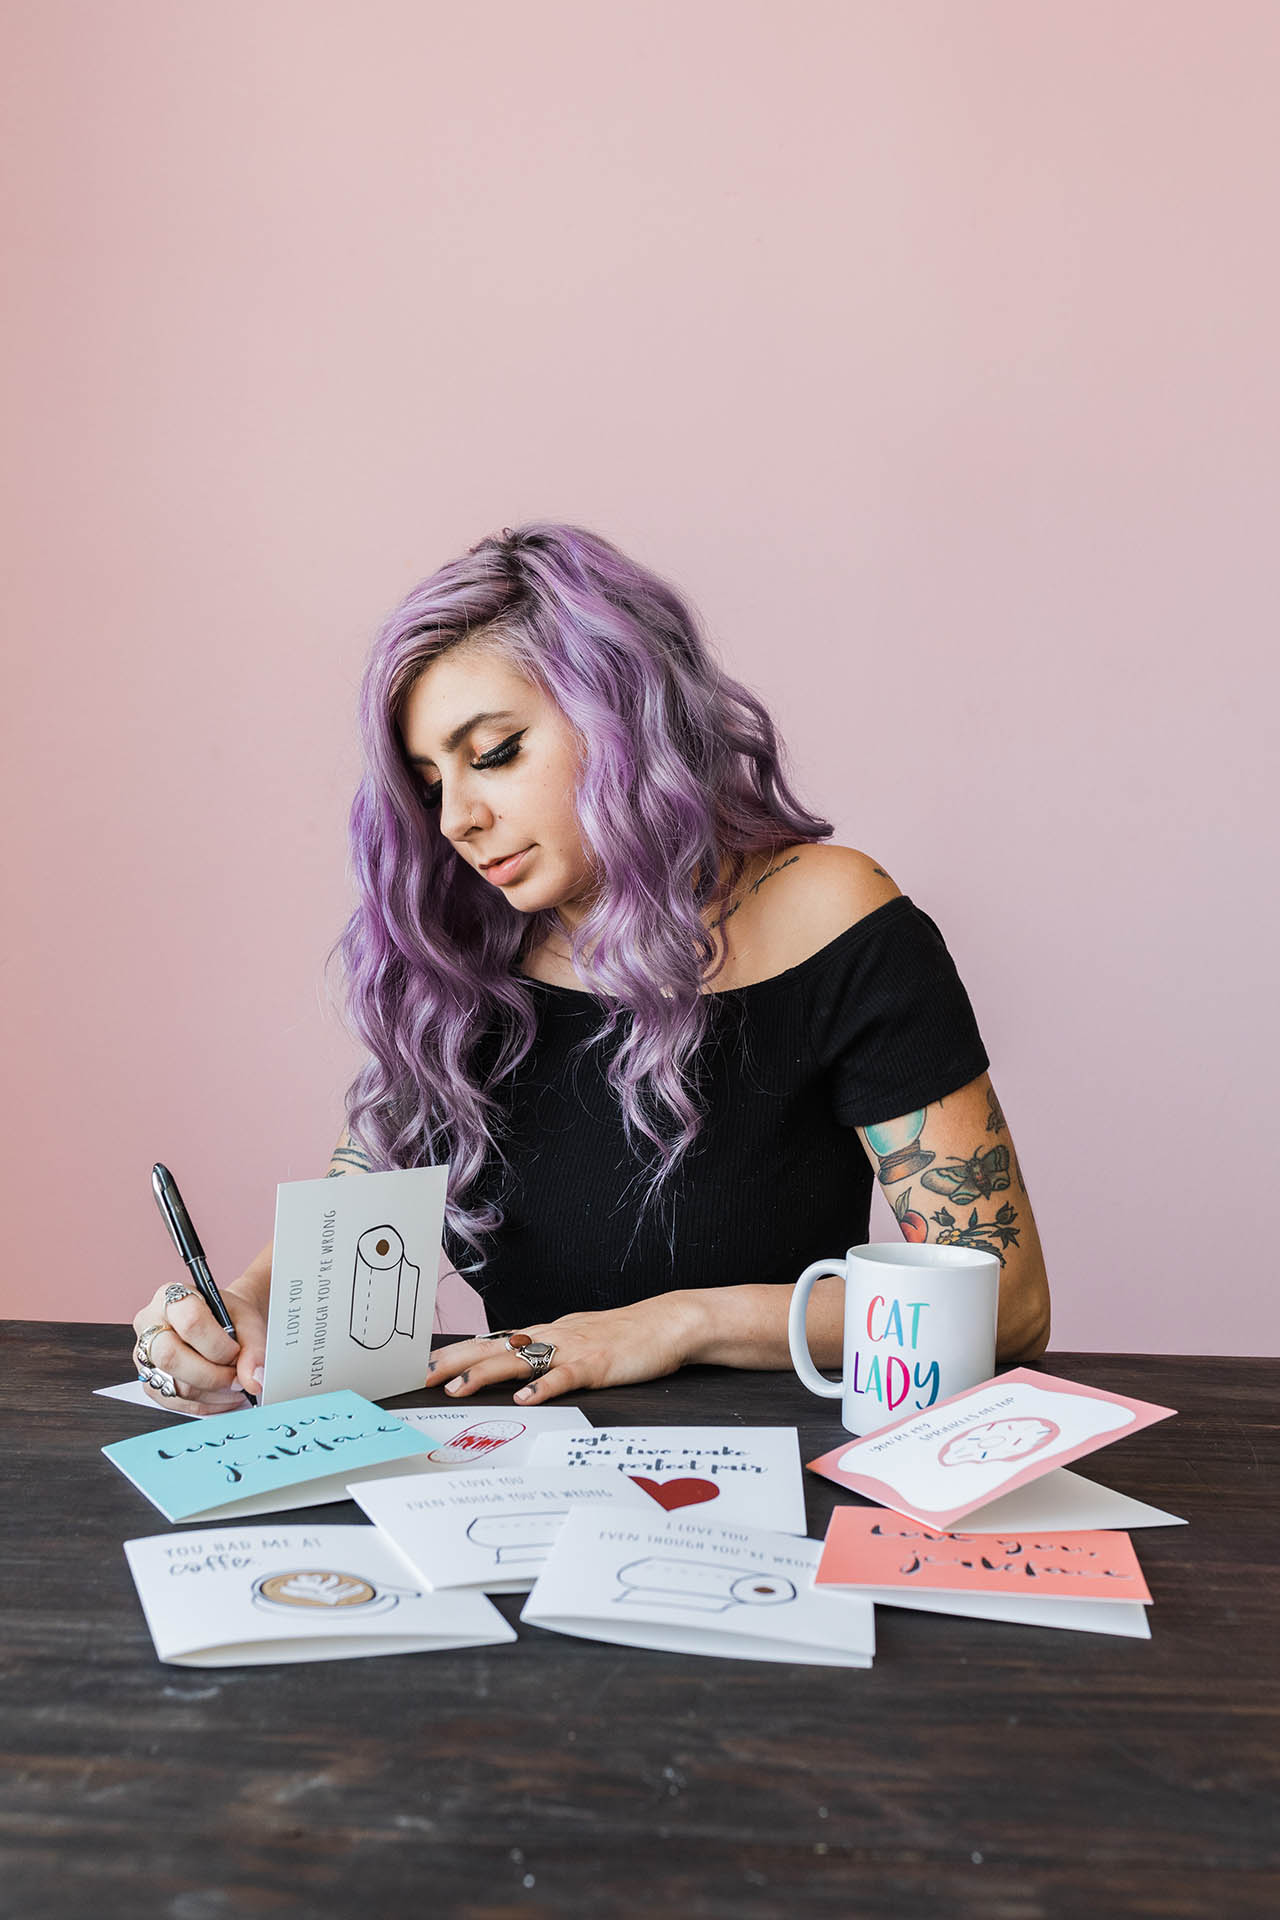 Dallas branding photographer; a woman with purple hair and tattoos wearing a black top and writing in a card in front of a light pink background